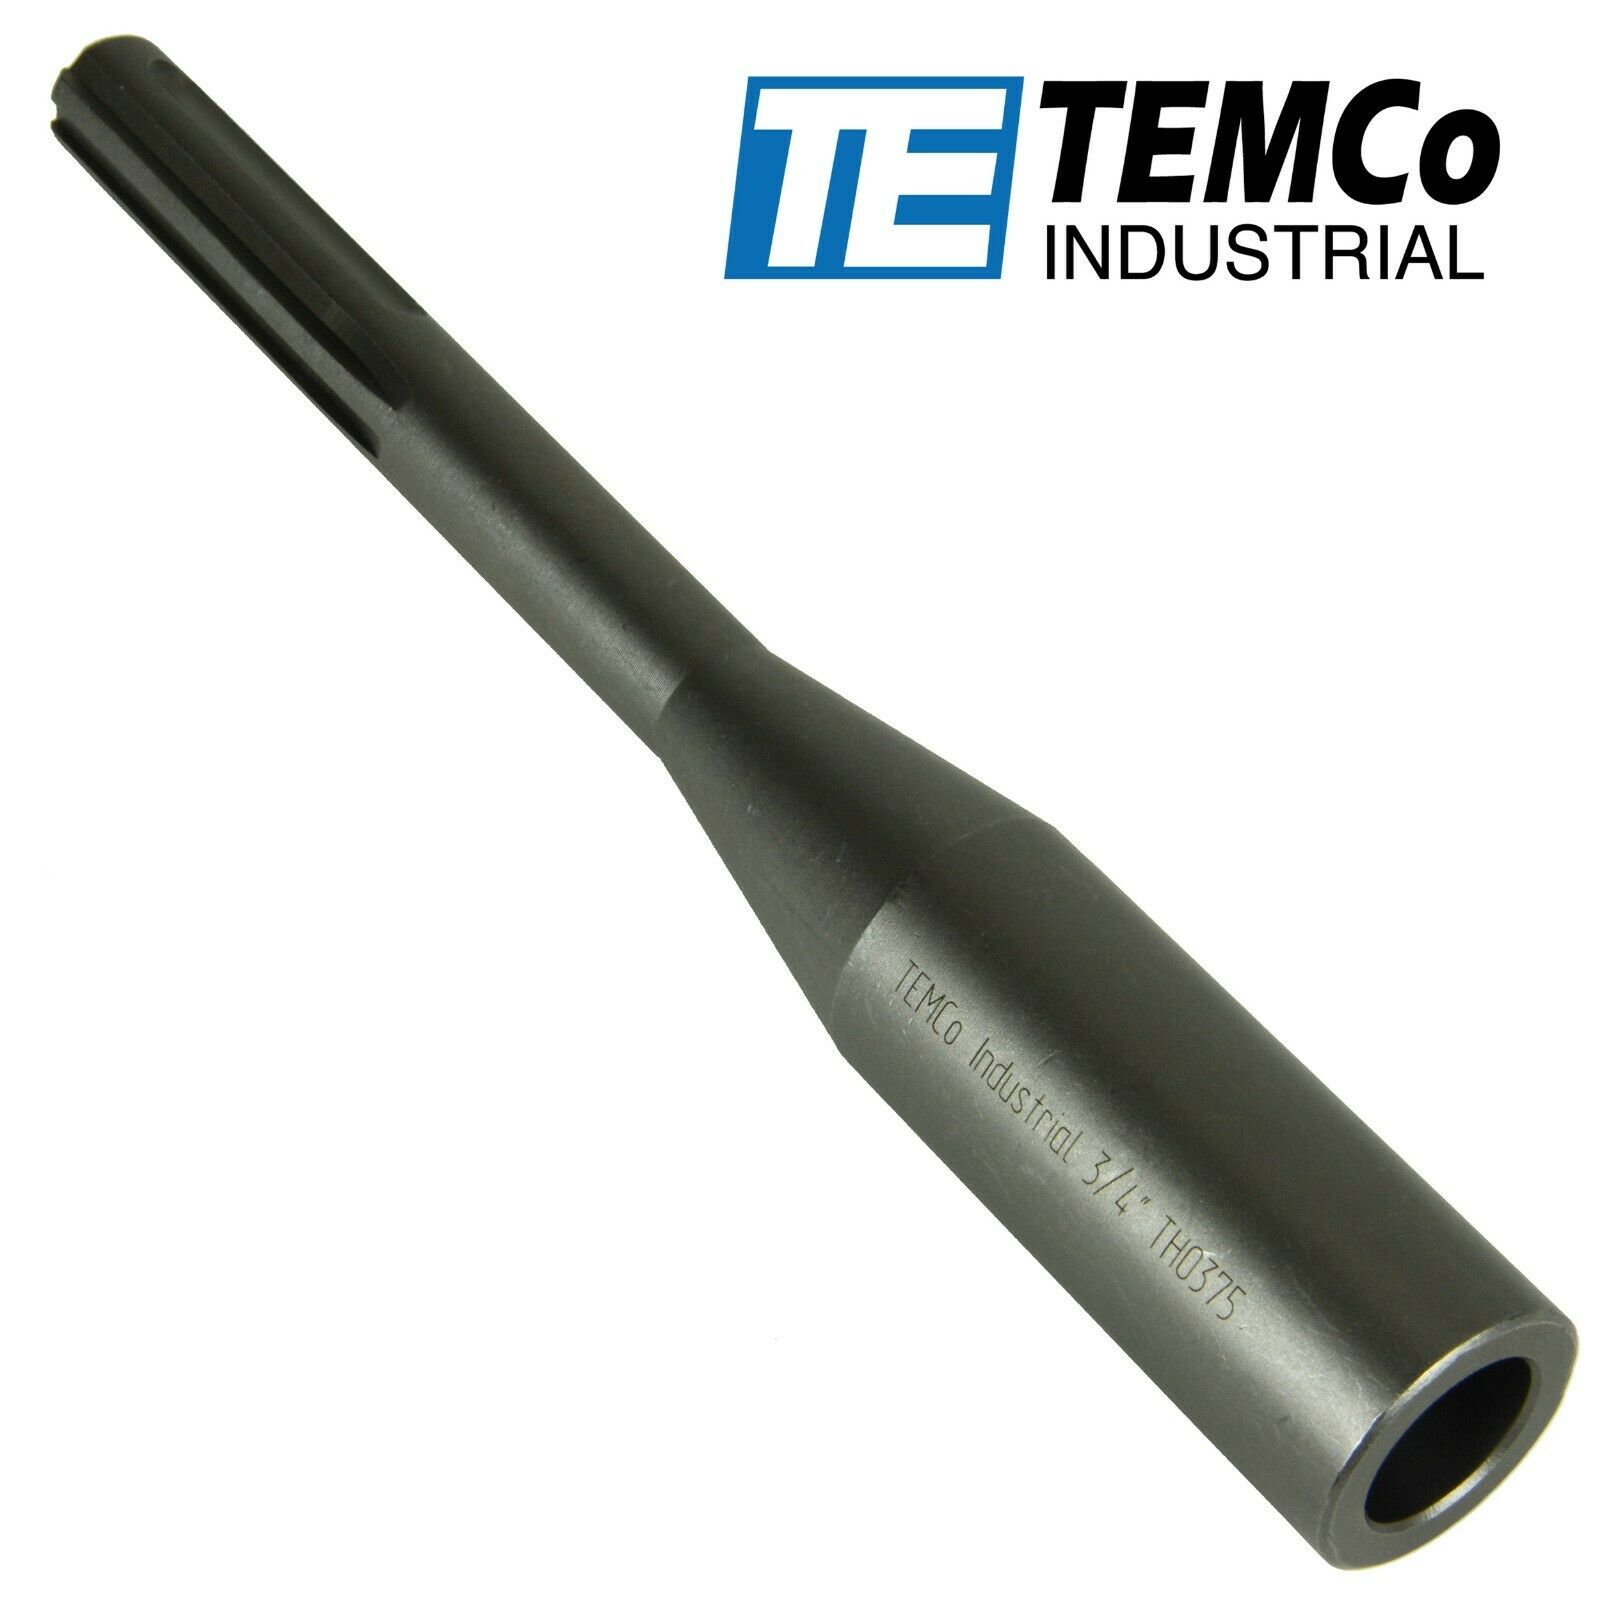 Temco Industrial - 3/4" Bore Sds Max Ground Rod Driver